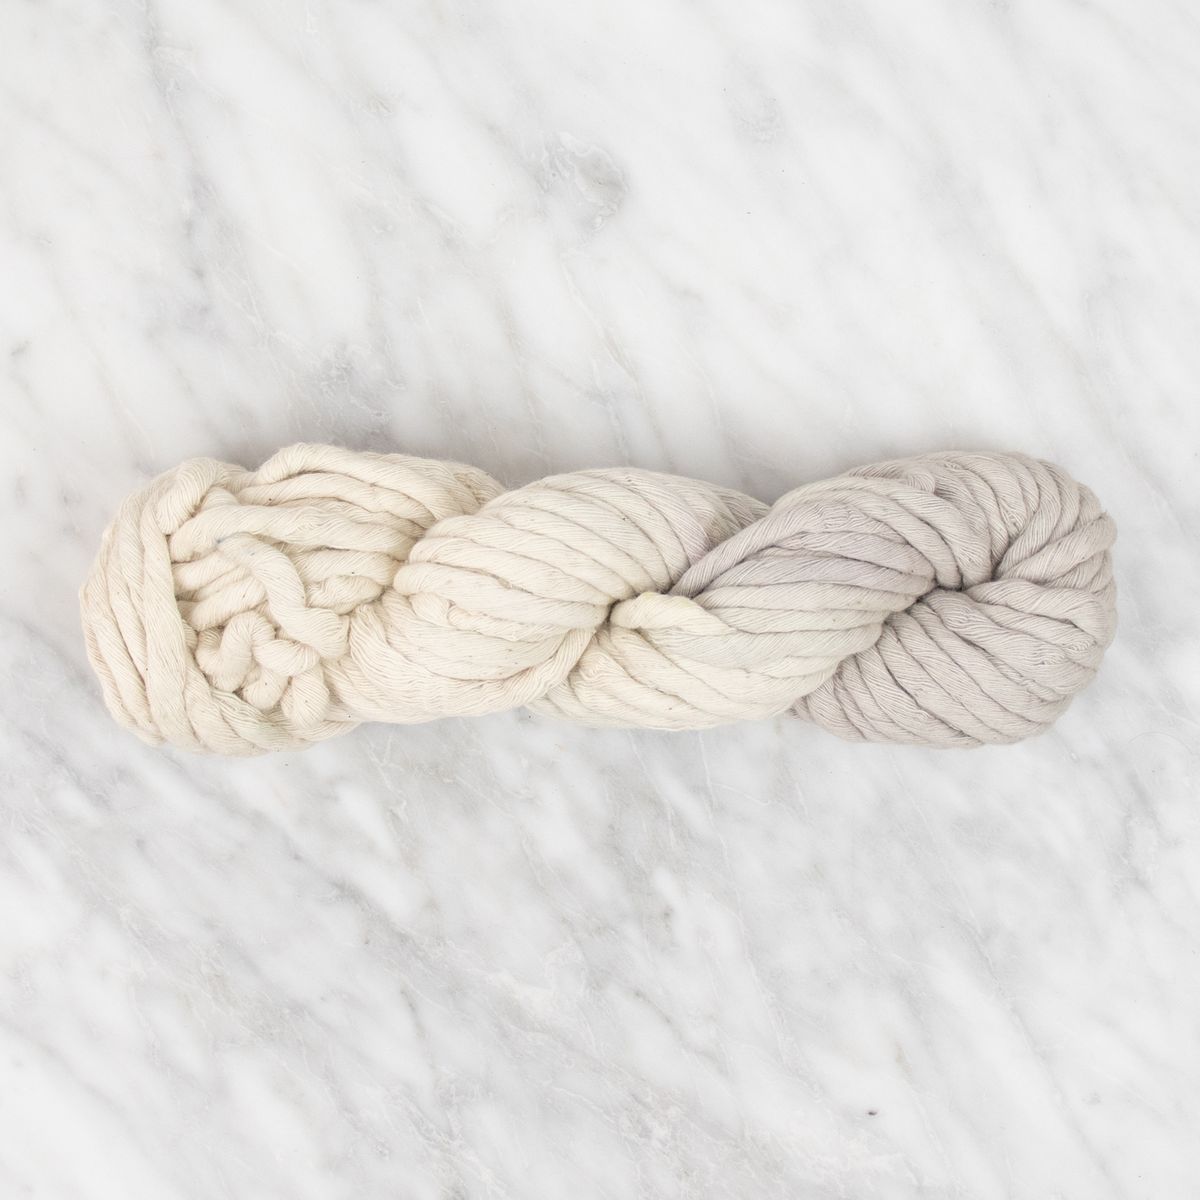 5mm Dip-Dyed Cotton String - Misty Lilac - 100 grams